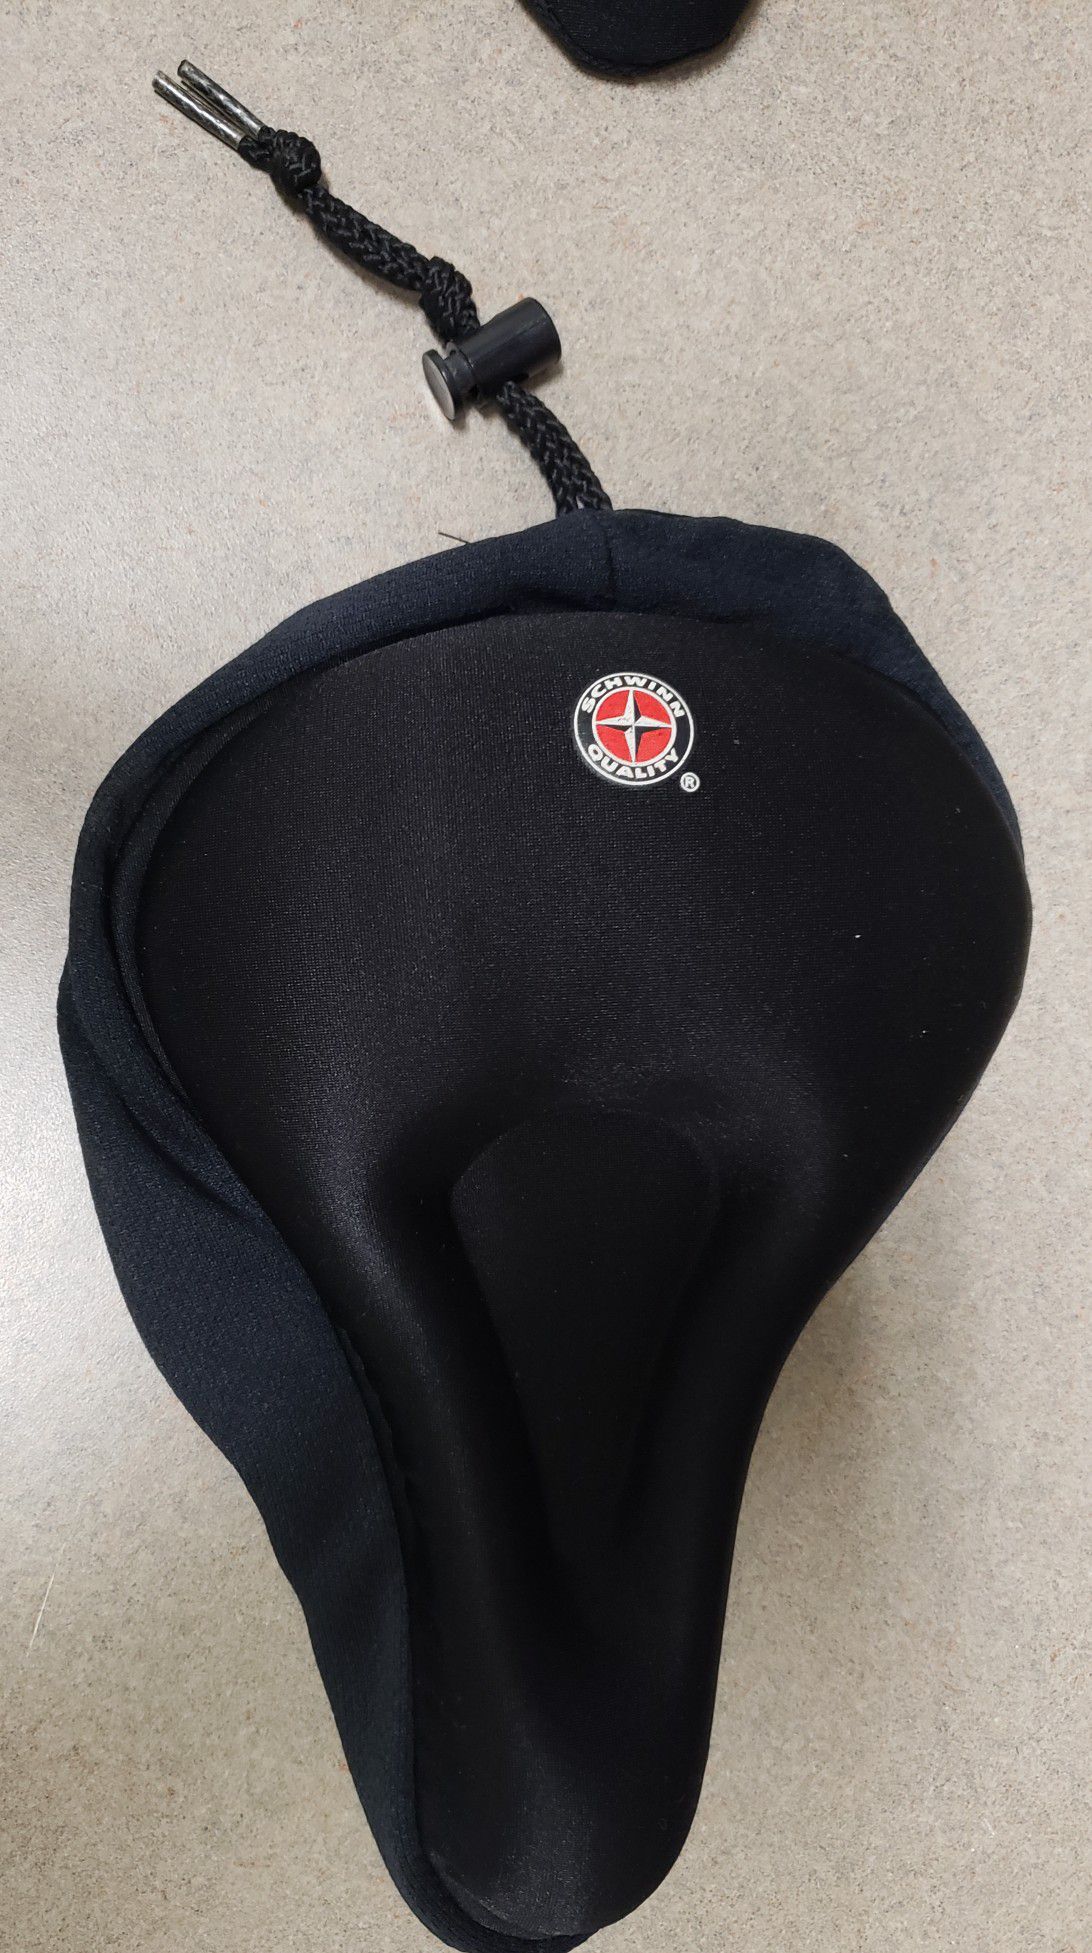 Schwinn padded bicycle cover